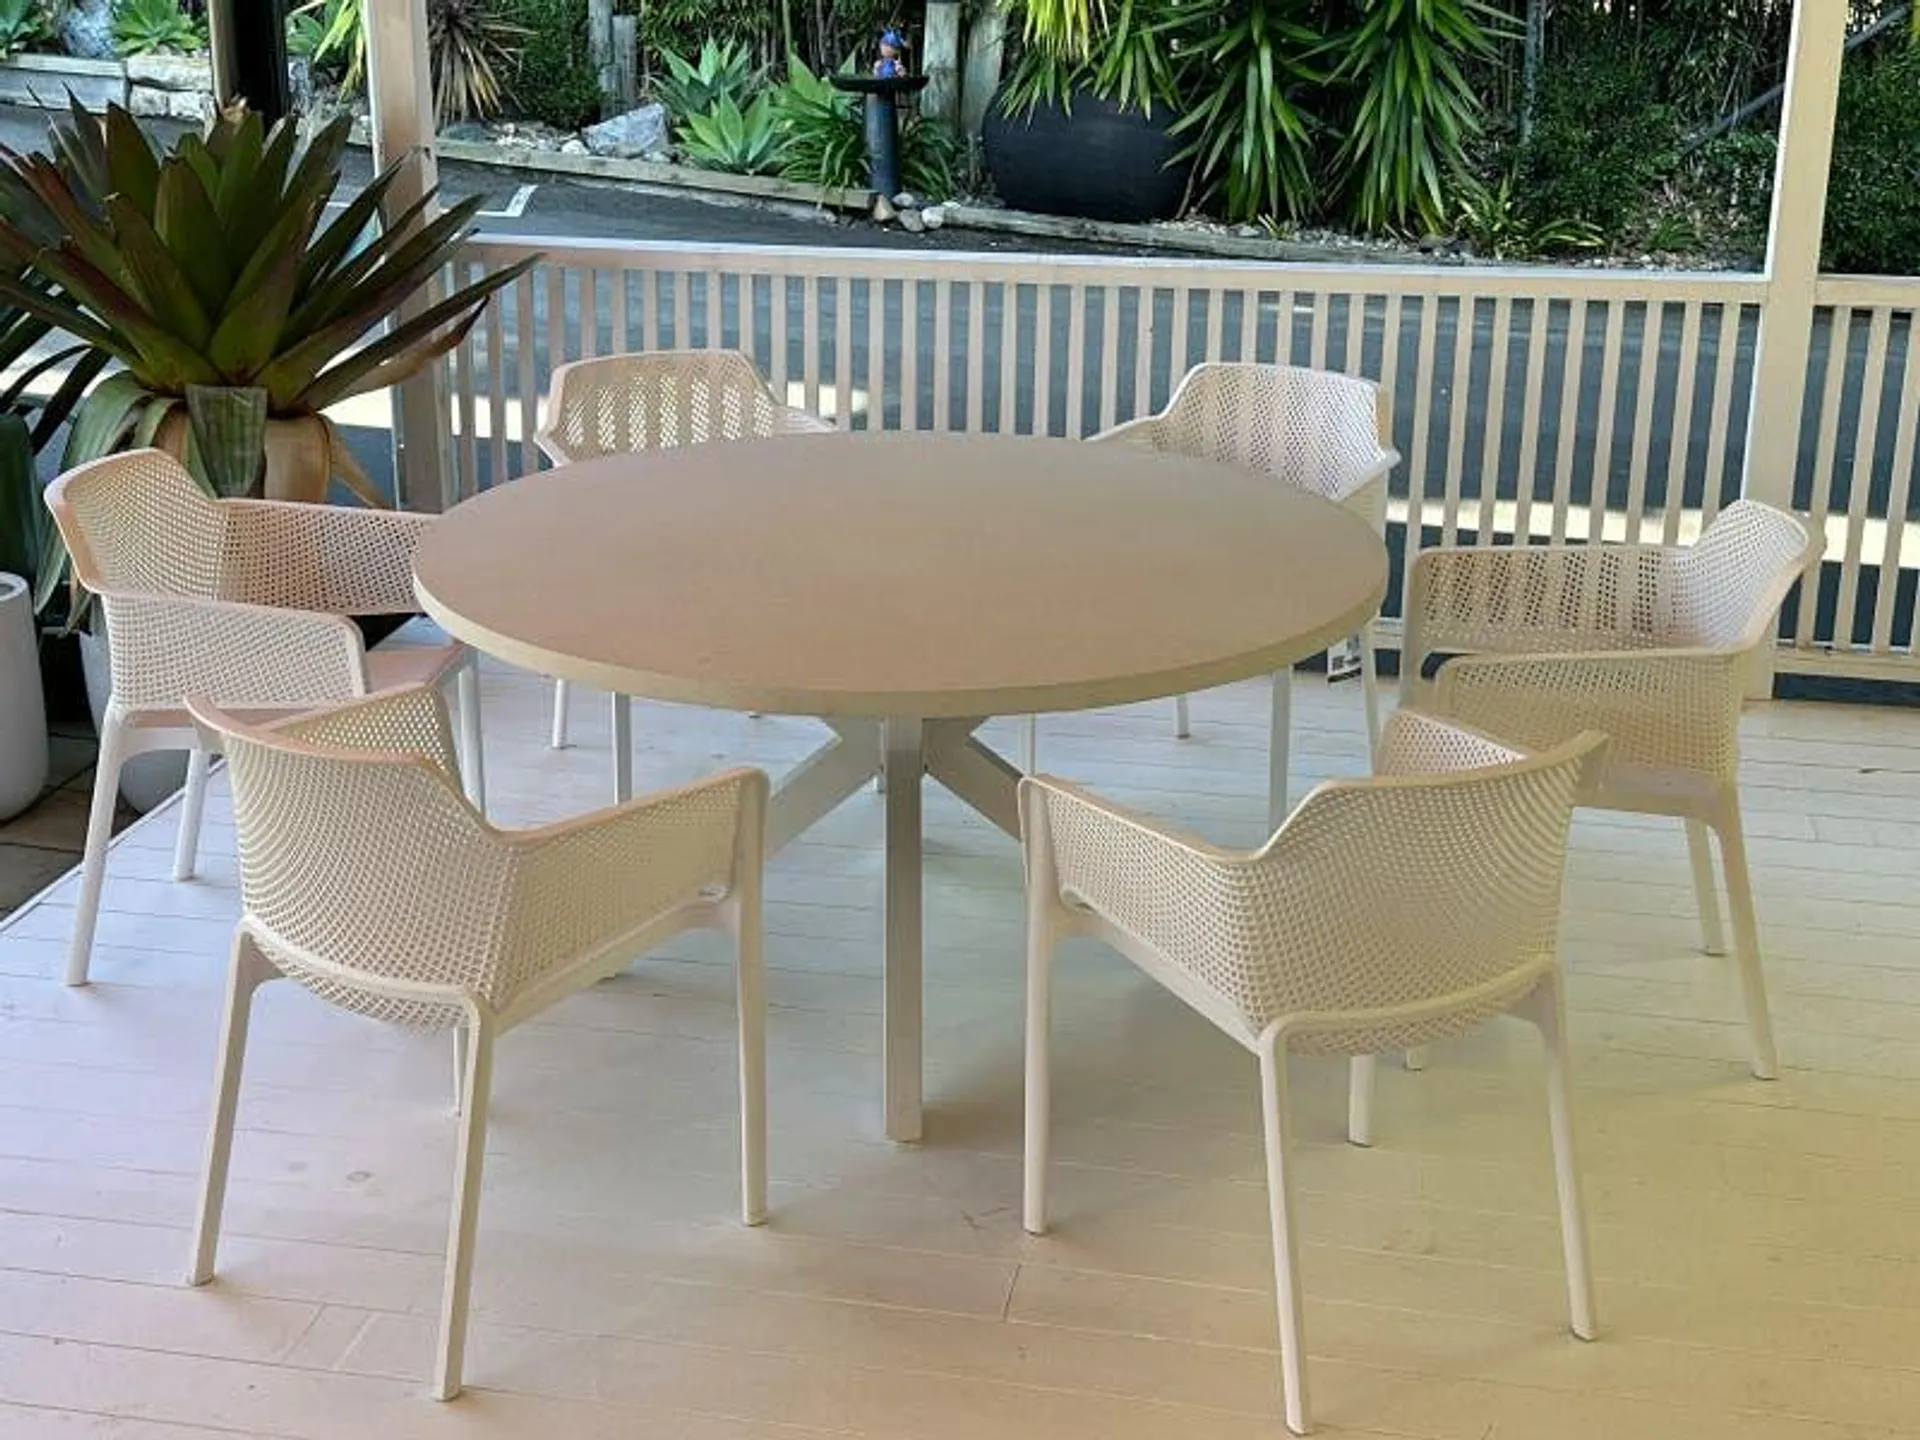 Geo Terrazzo Table with Bailey Chairs 7pc Outdoor Dining Setting